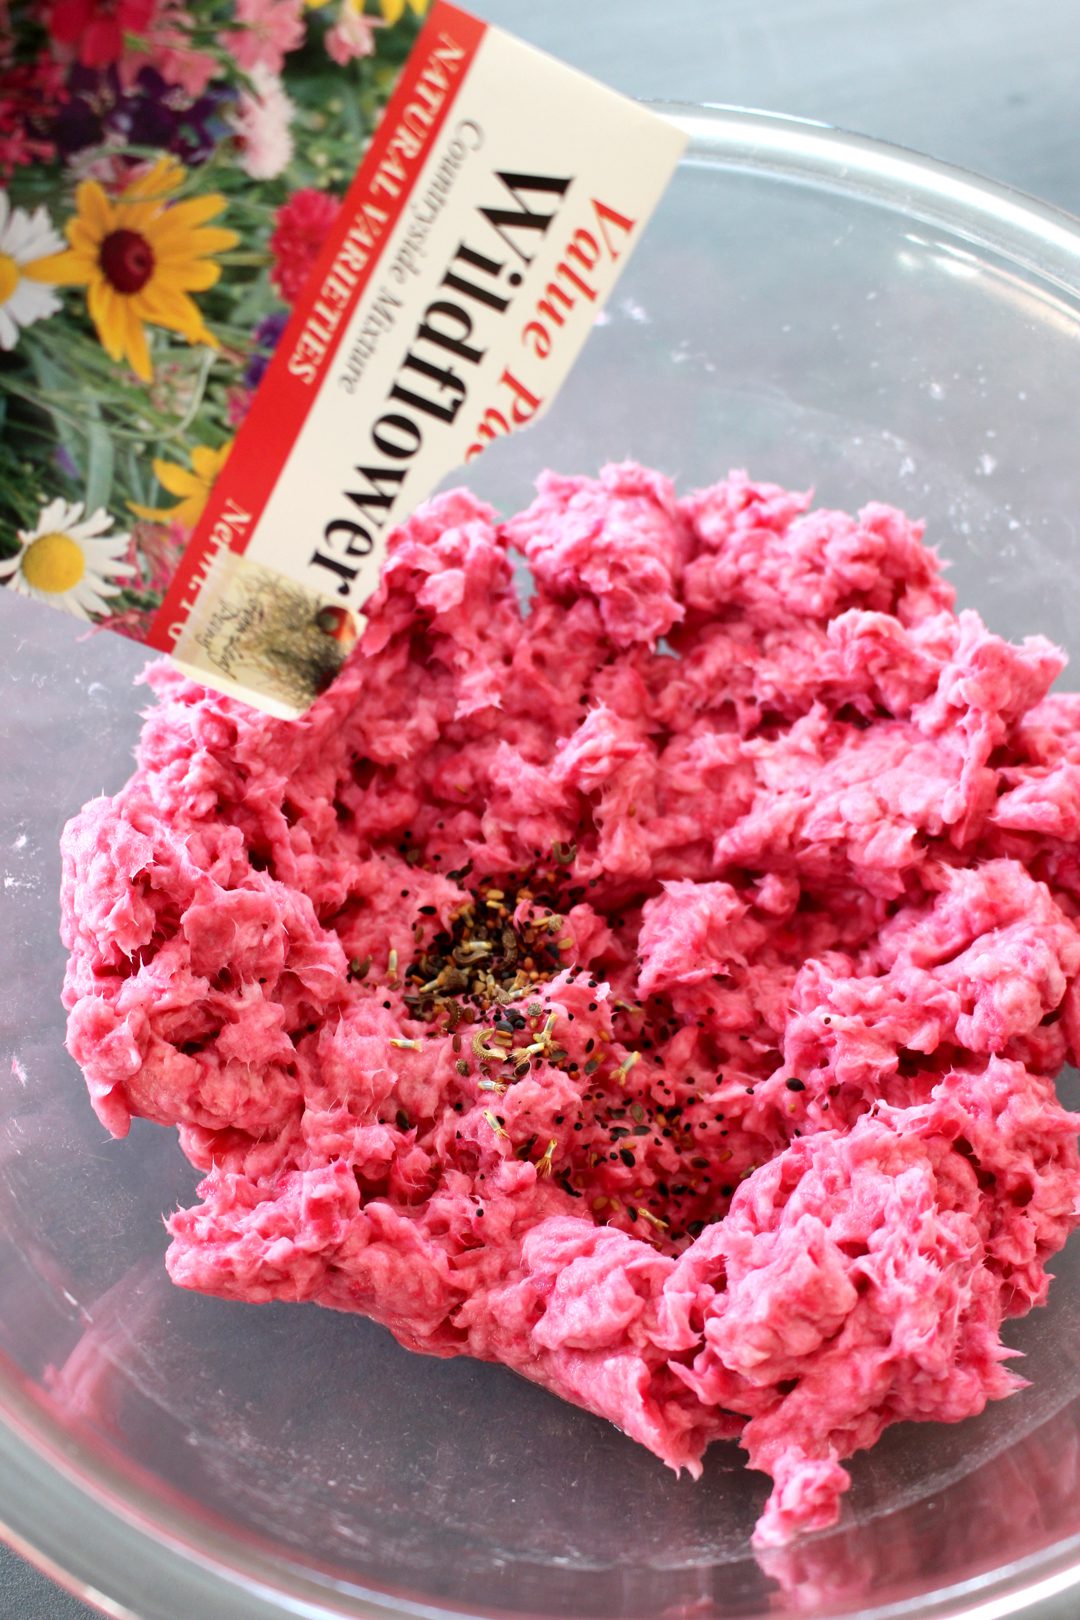 Pouring wildflower seeds into pink paper pulp in a bowl.